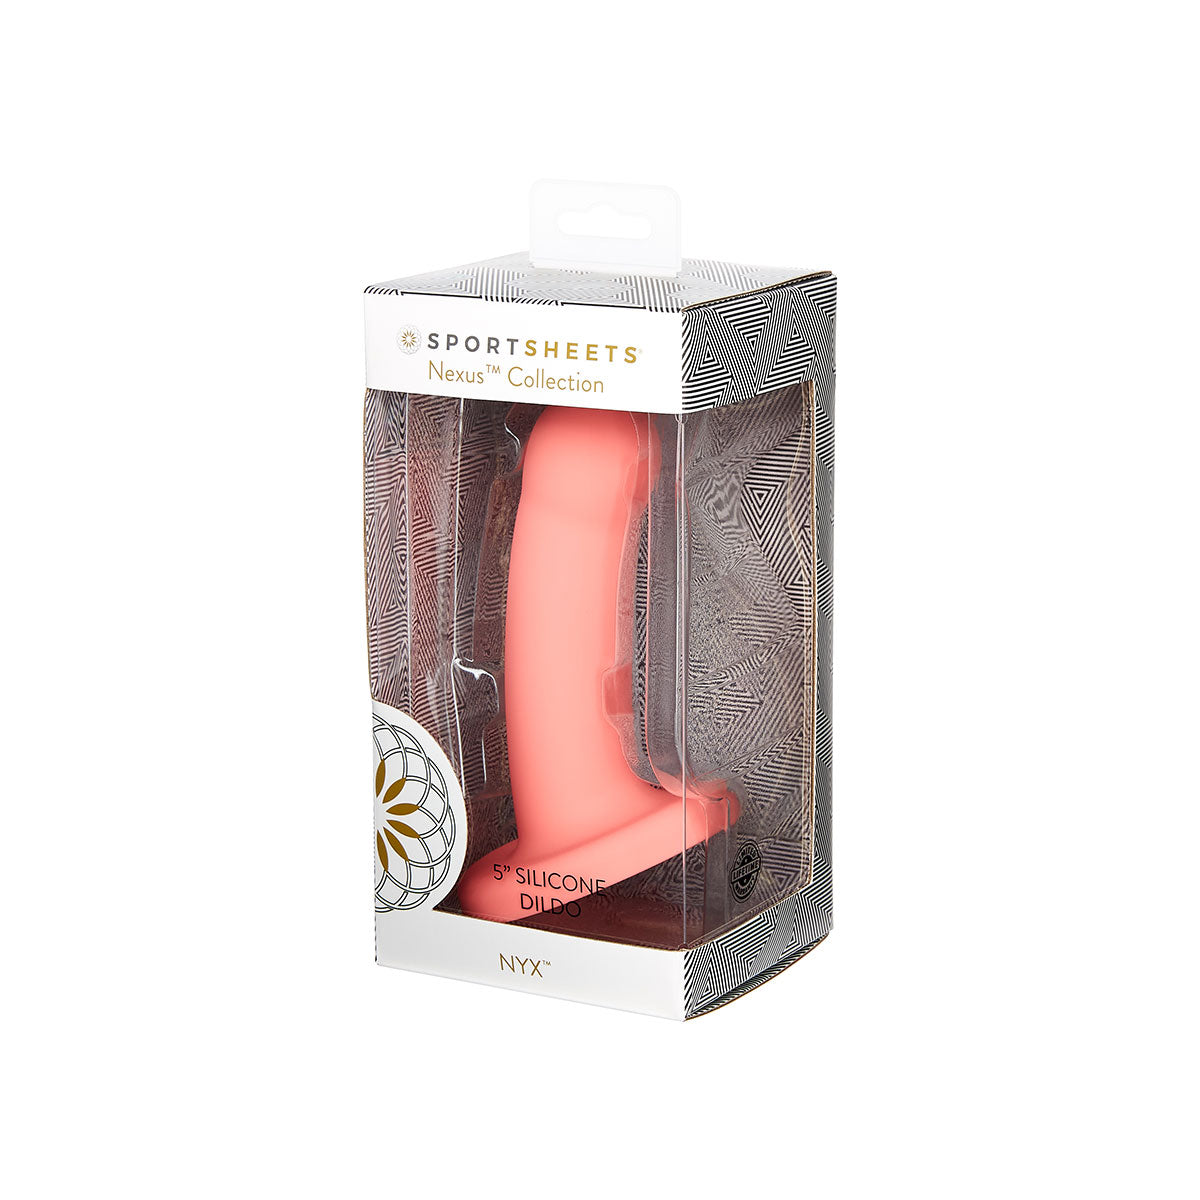 Nexus Dil Nyx 5" - Coral Intimates Adult Boutique